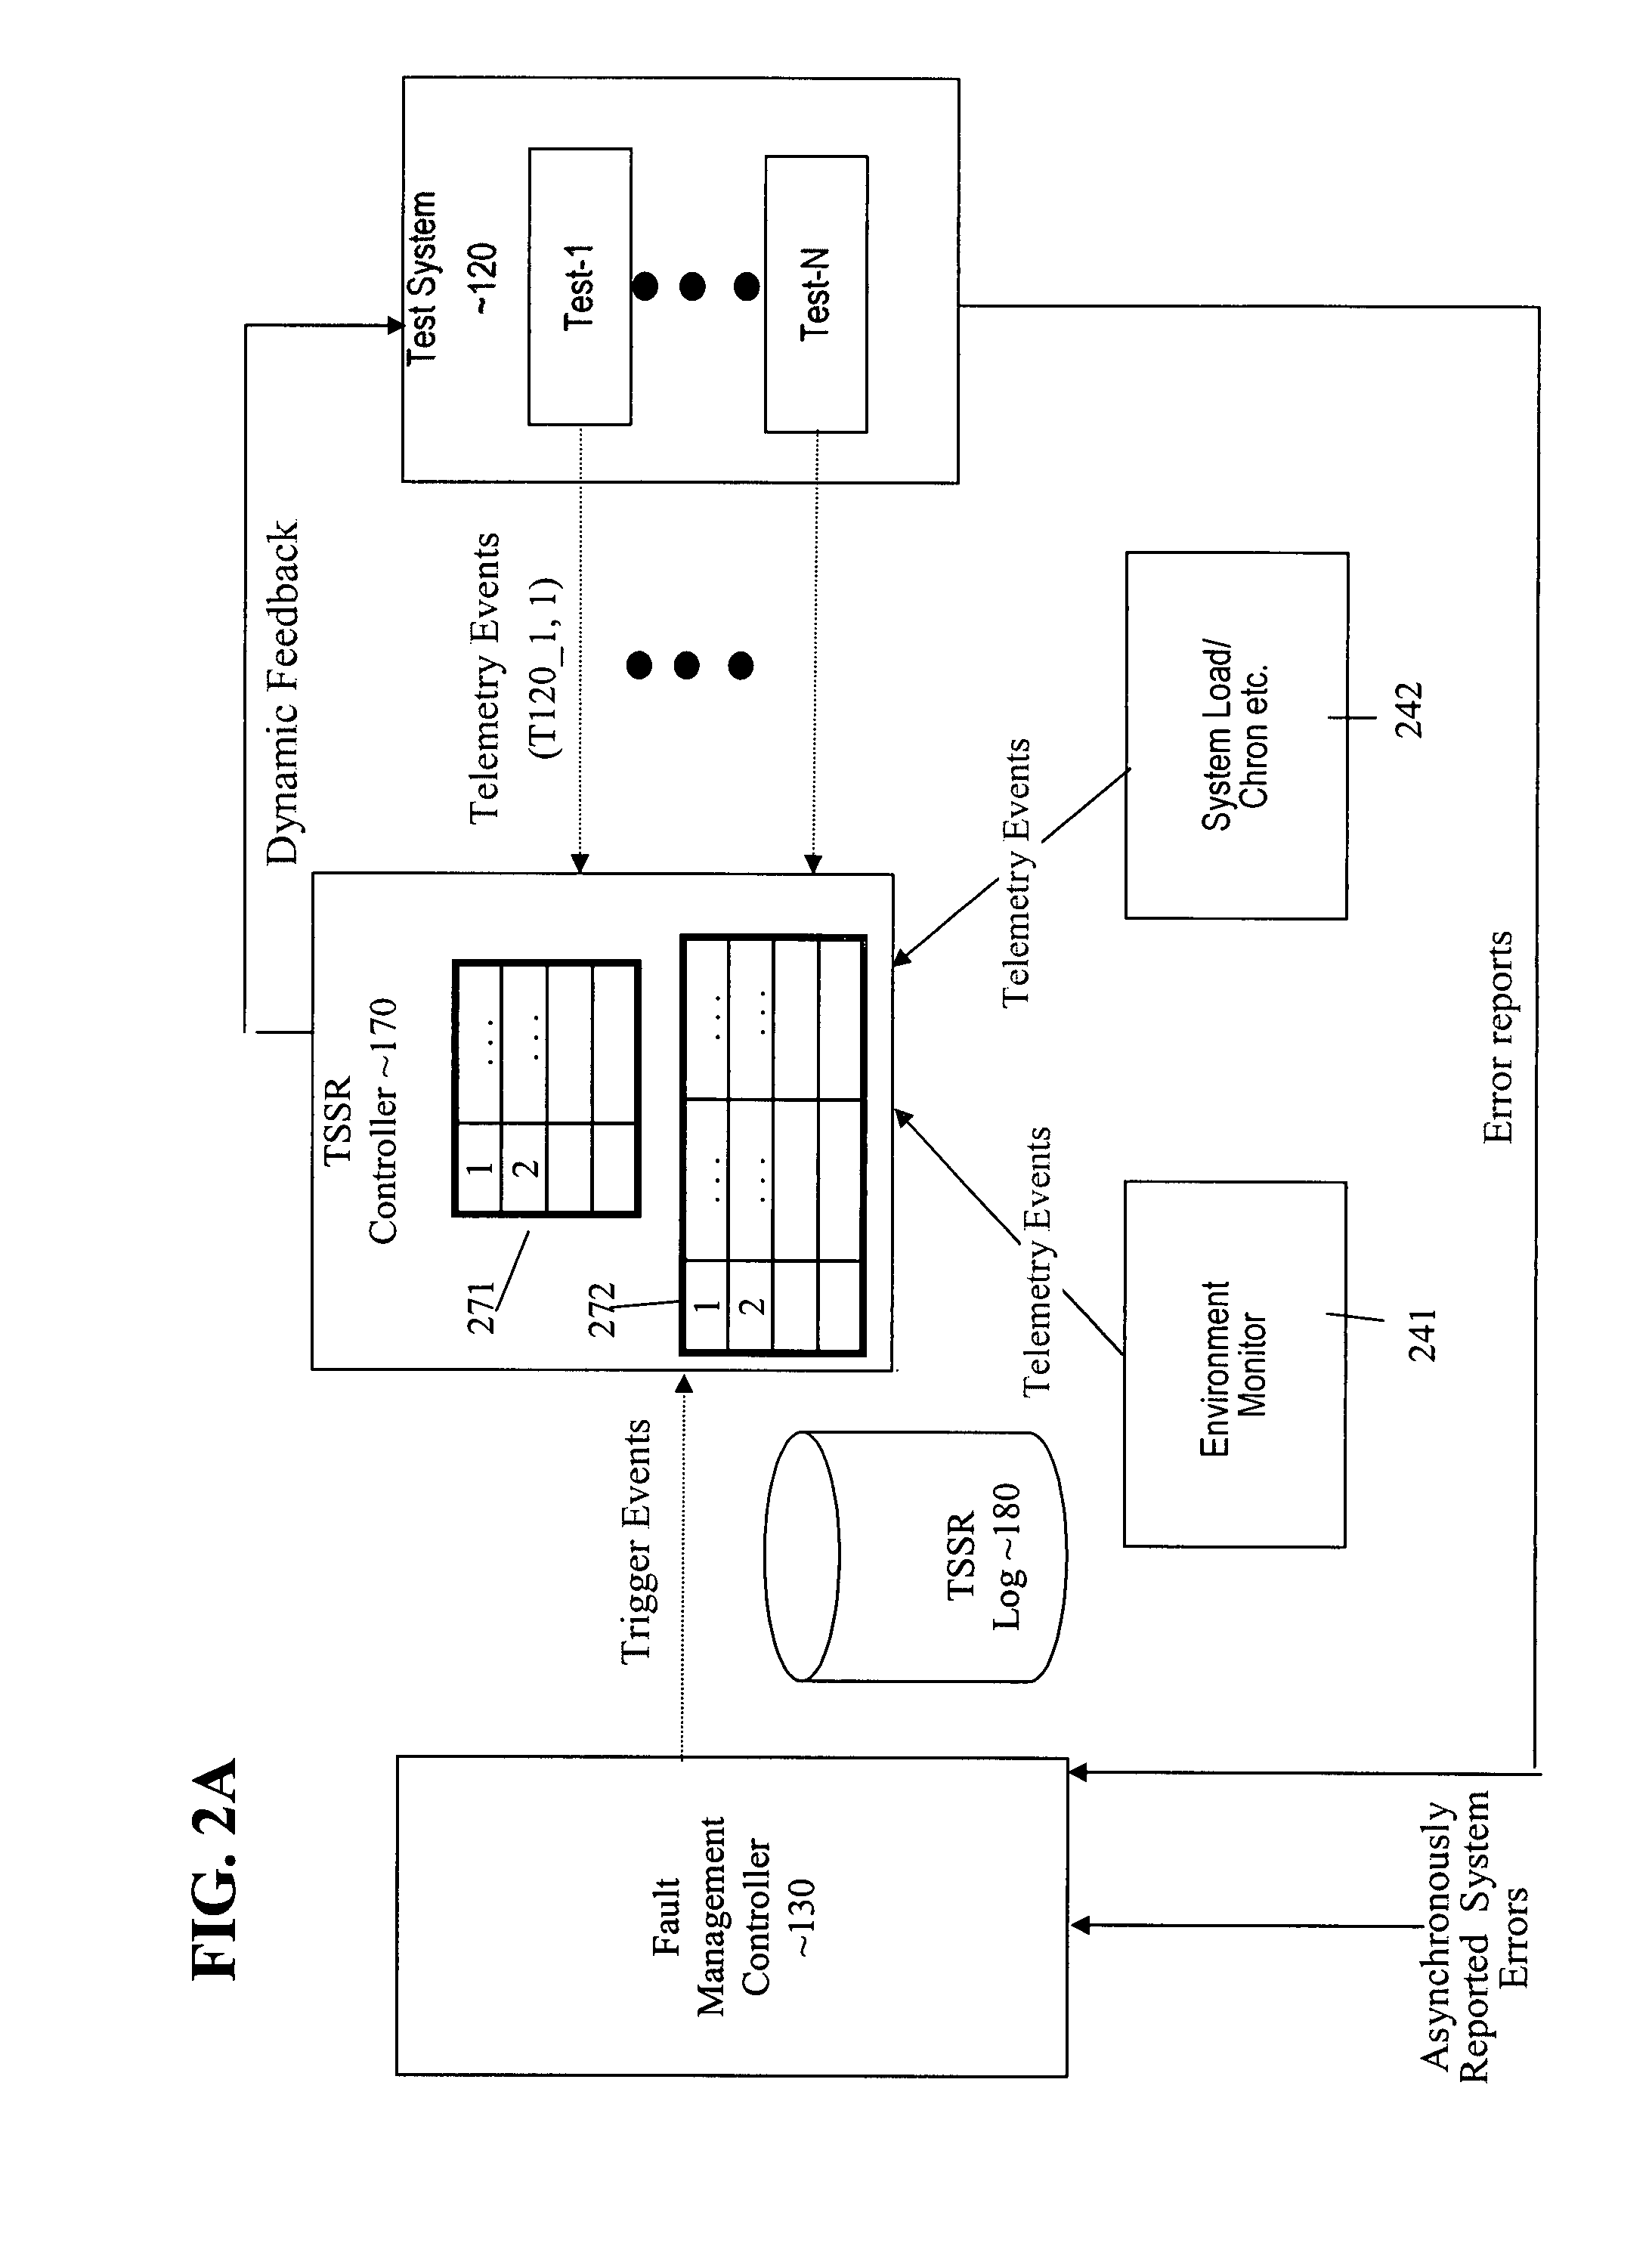 Method and system for automatic correlation of asynchronous errors and stimuli